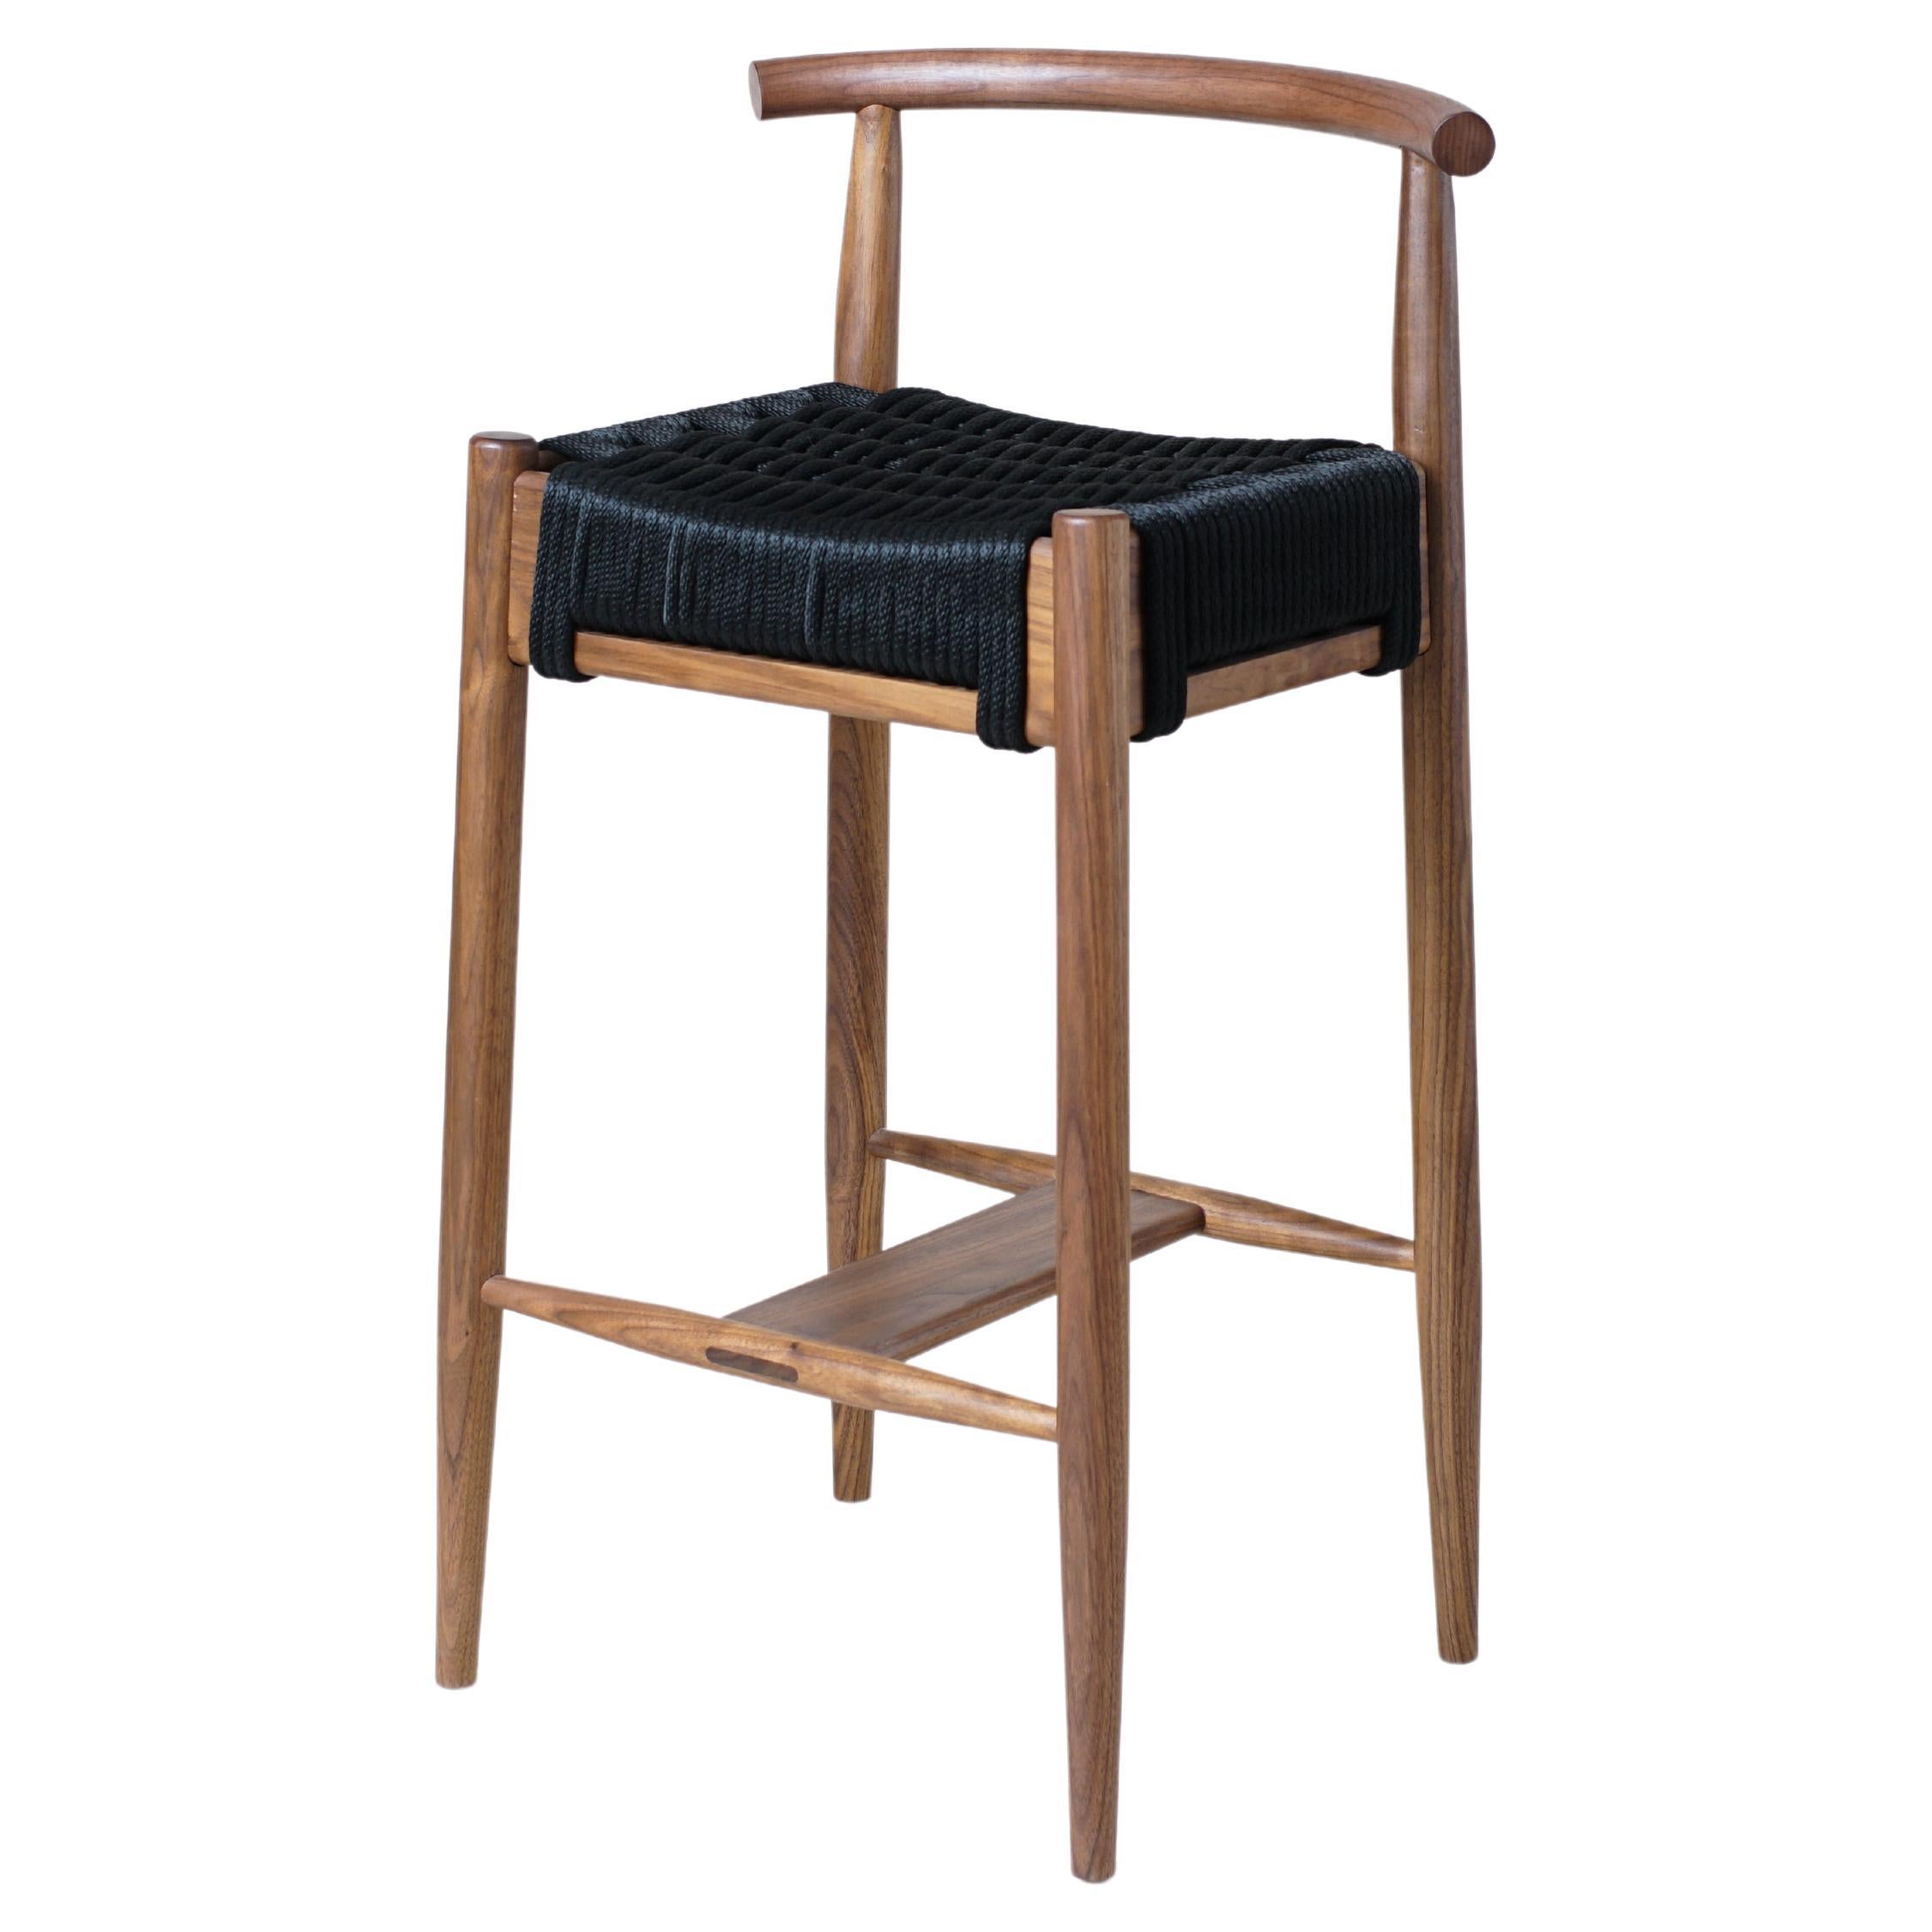 Harbor Bar Stool, Handcrafted Modern Rope Seat Bar Stool with Backrest